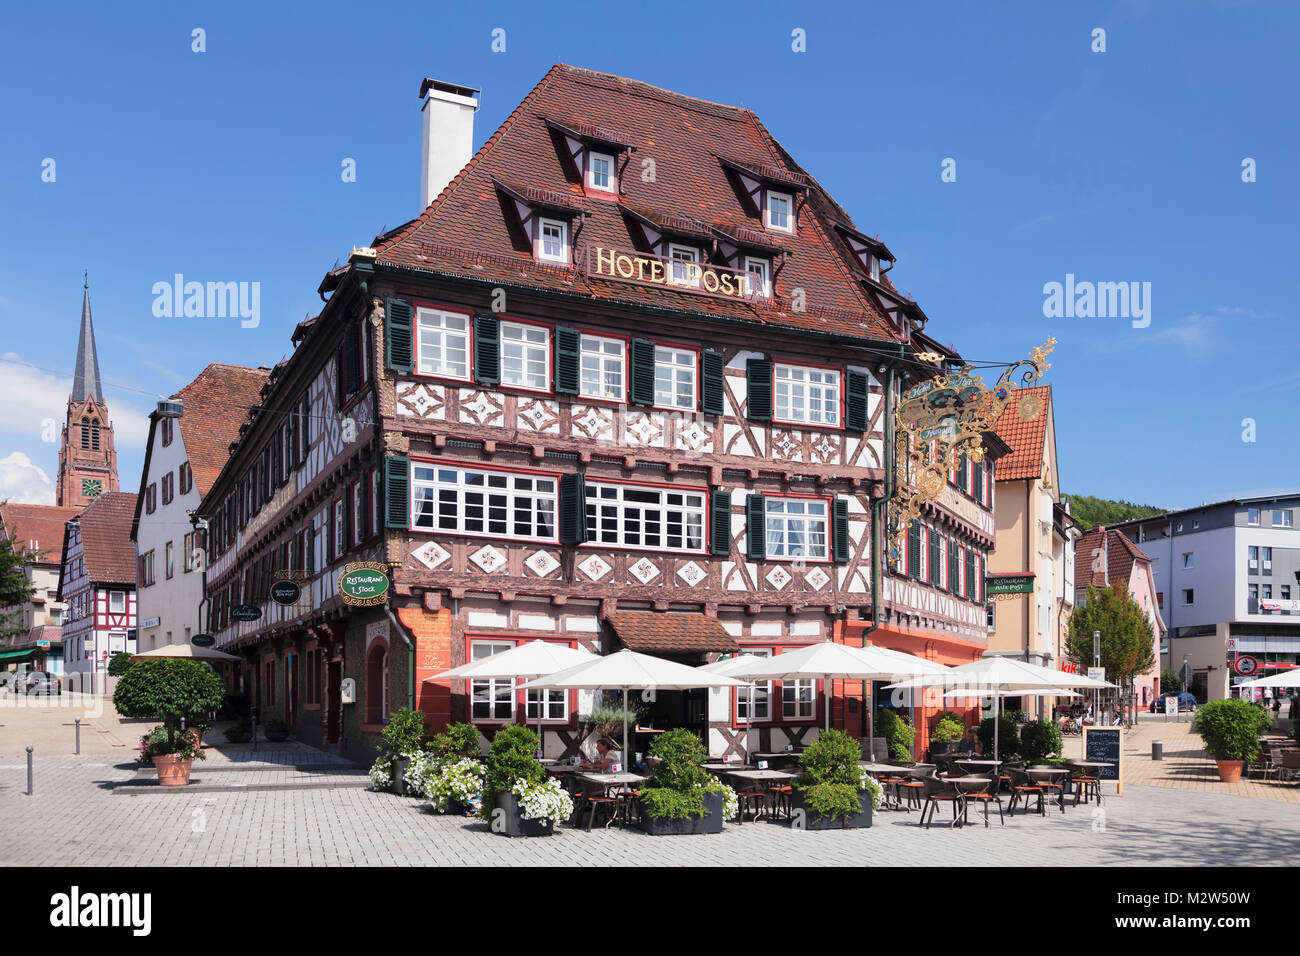 Historical half-timbered house Hotel Post, Nagold, Black Forest, Baden-Wurttemberg, Germany Stock Photo